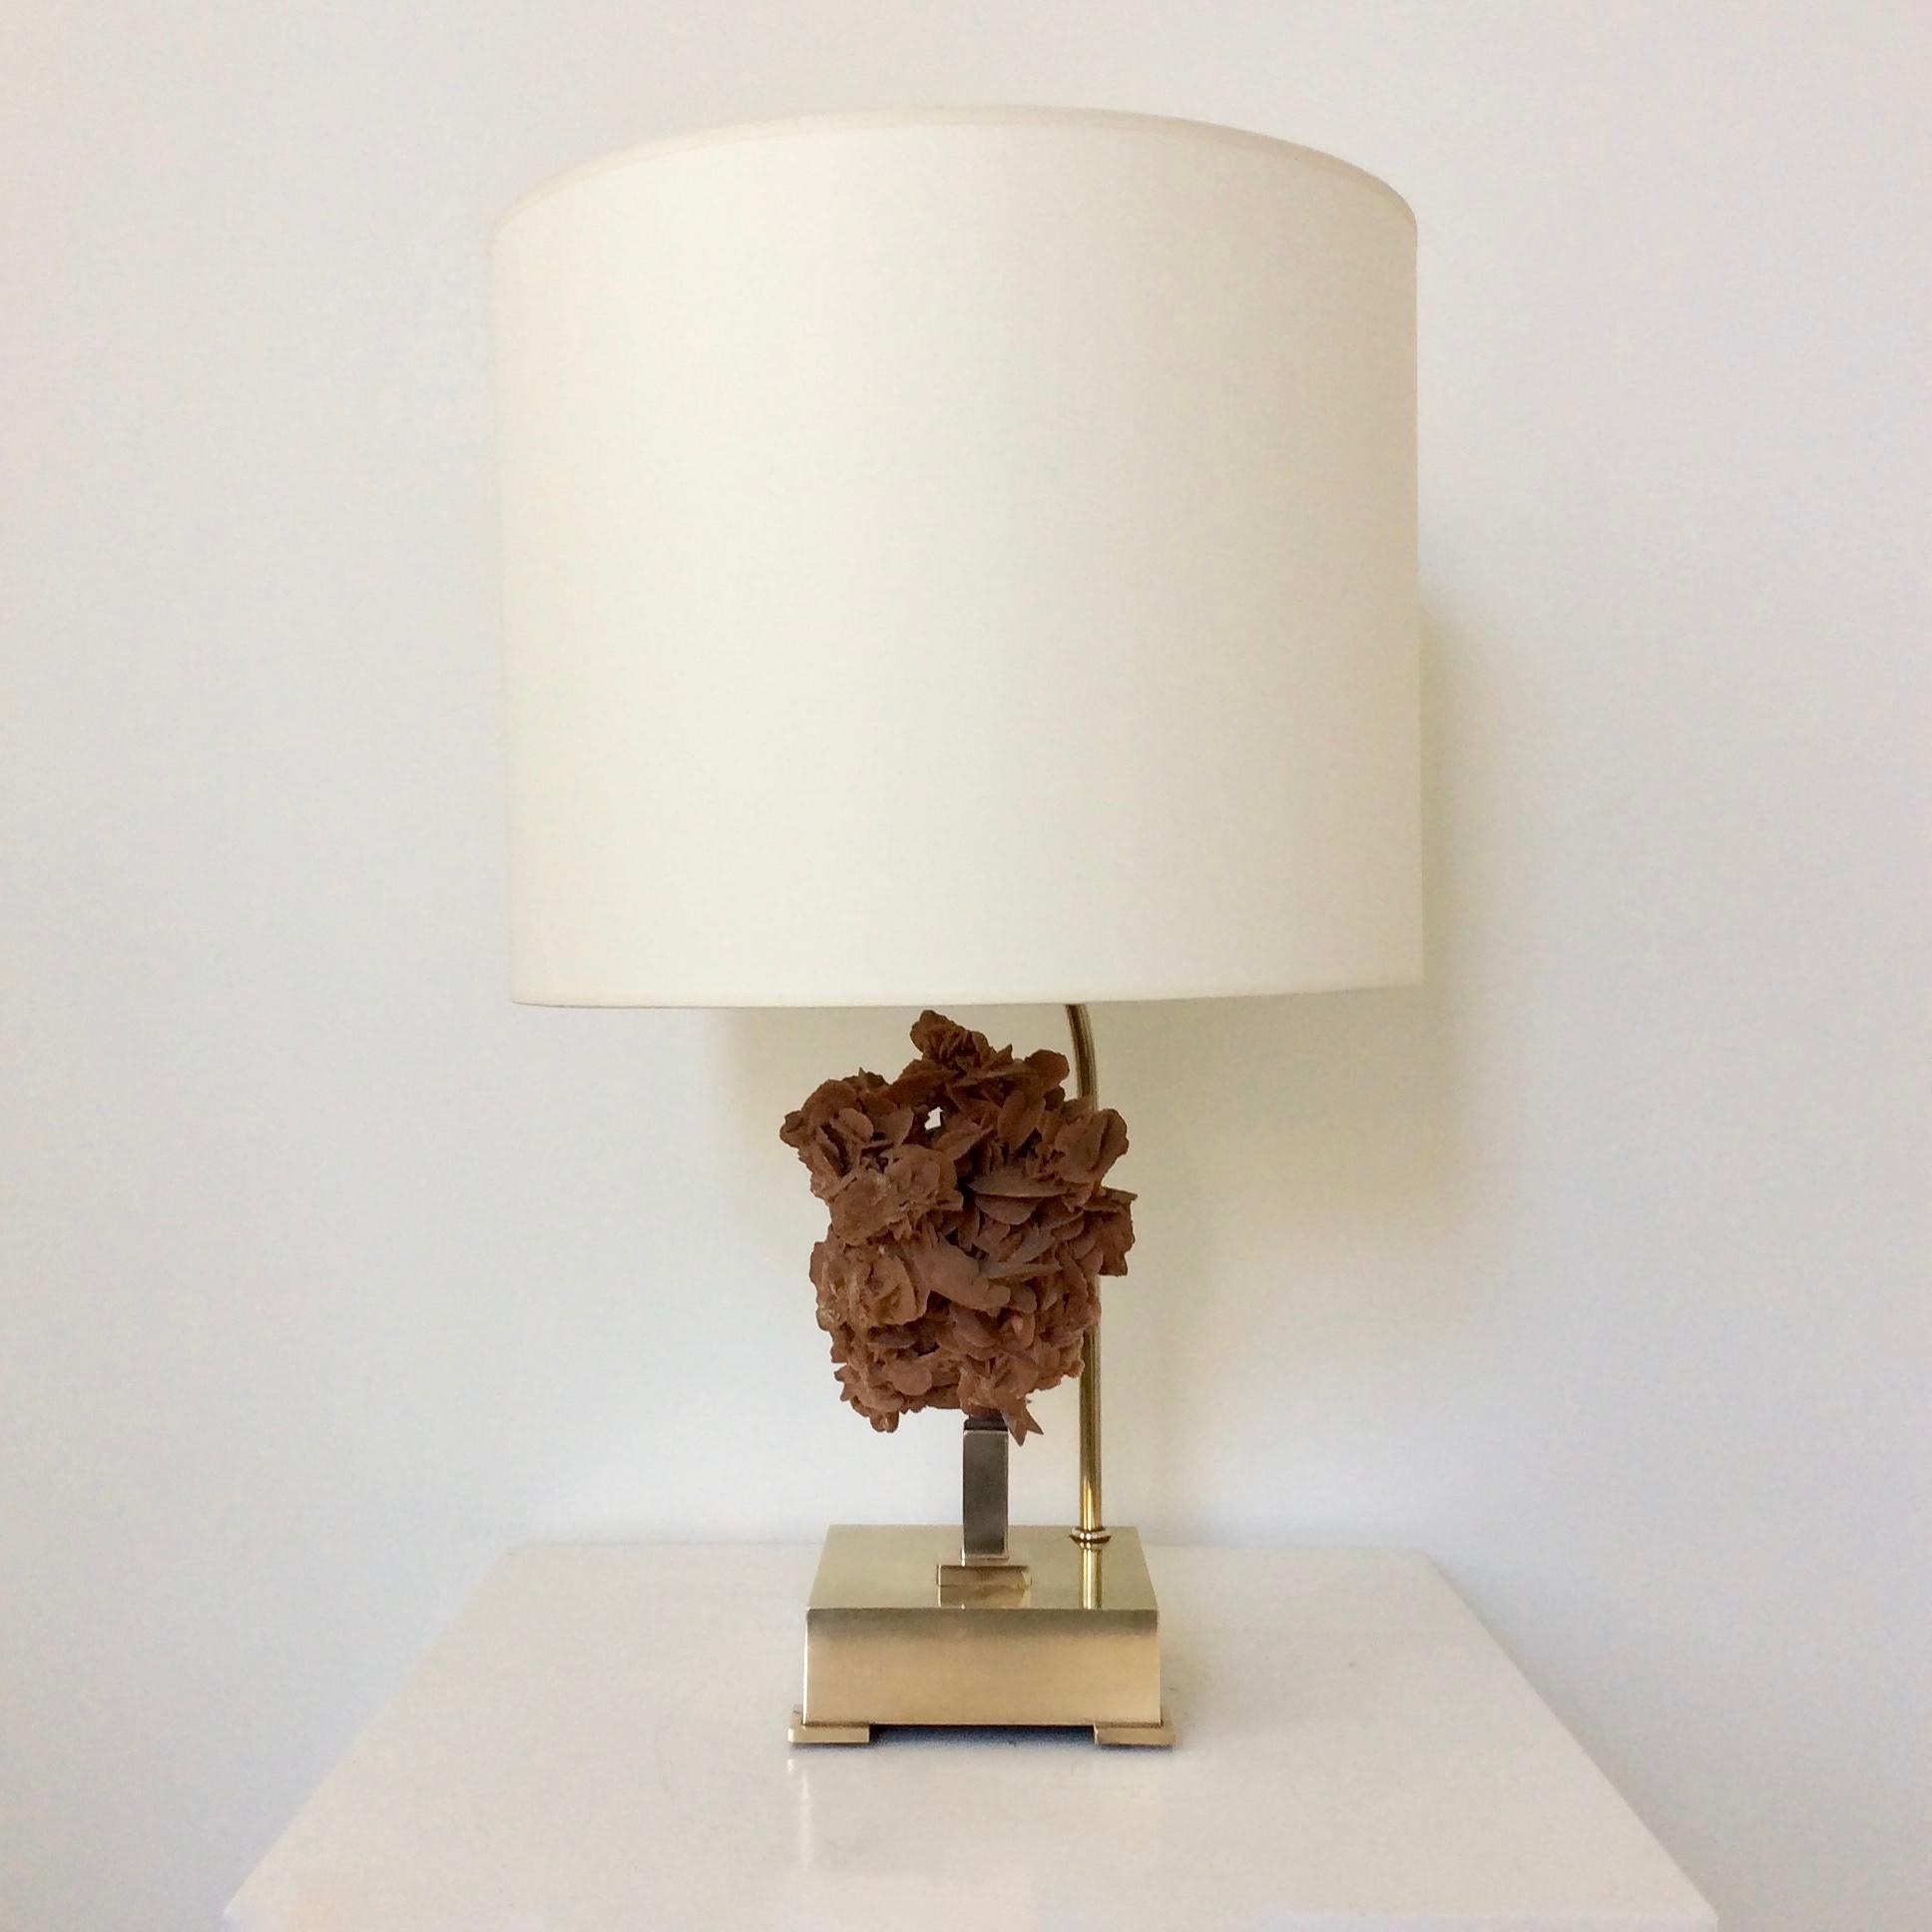 Late 20th Century Table Lamp, Desert Rose and Brass, by Willy Daro, circa 1970, Belgium